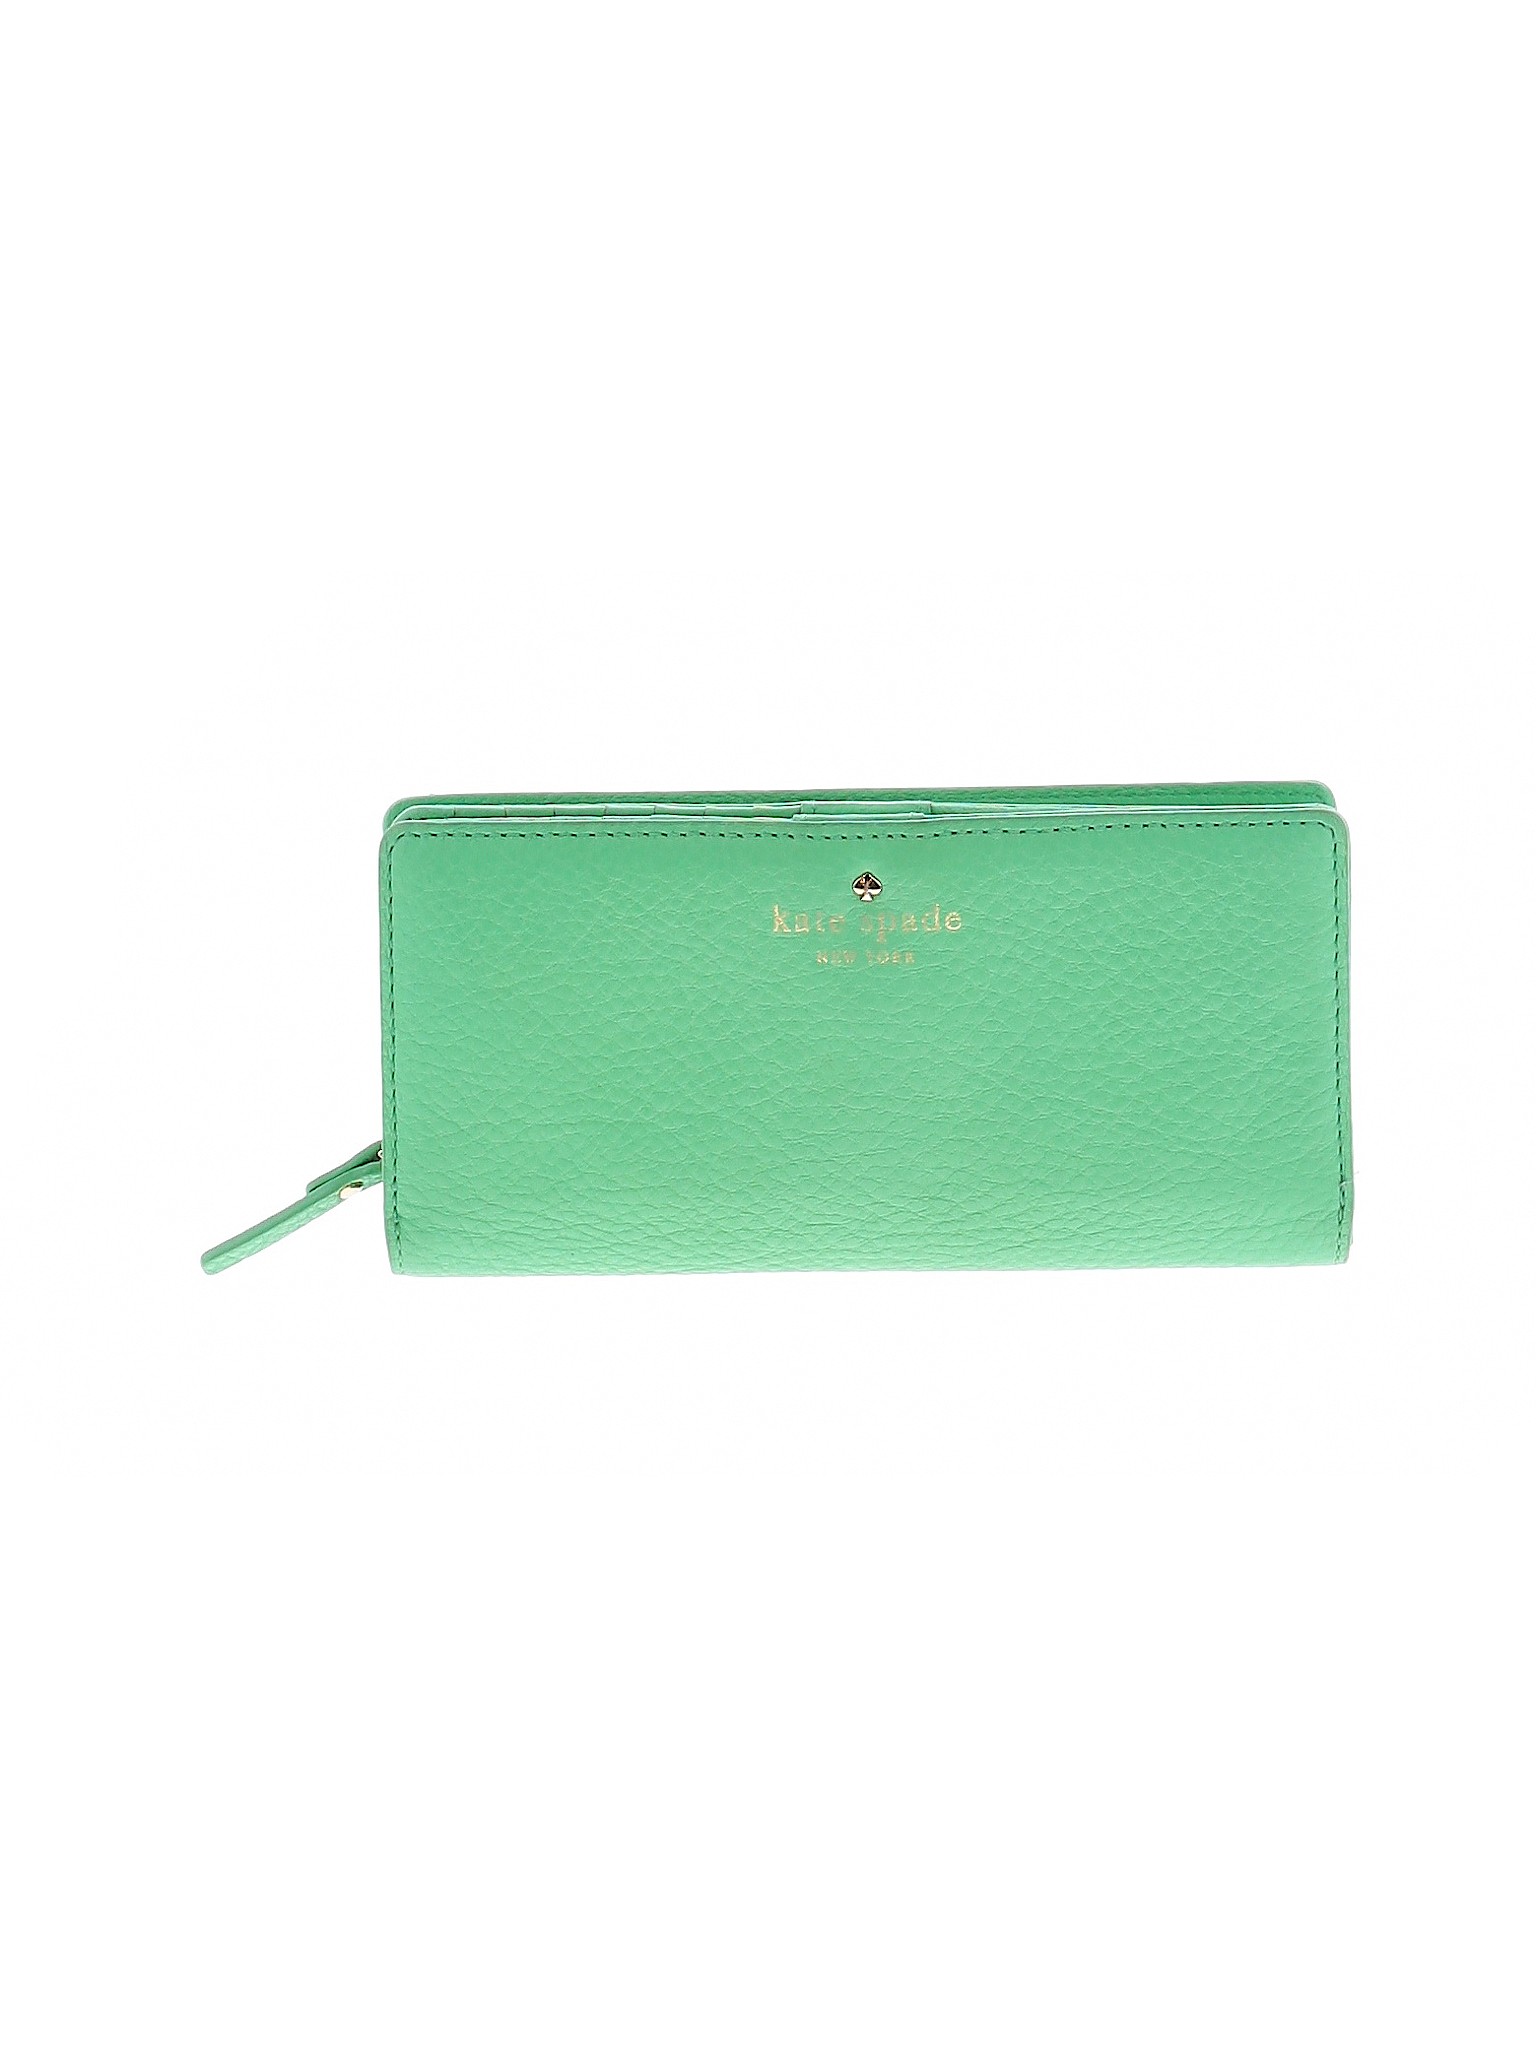 Kate Spade New York Solid Green Leather Wallet One Size - 75% off | thredUP